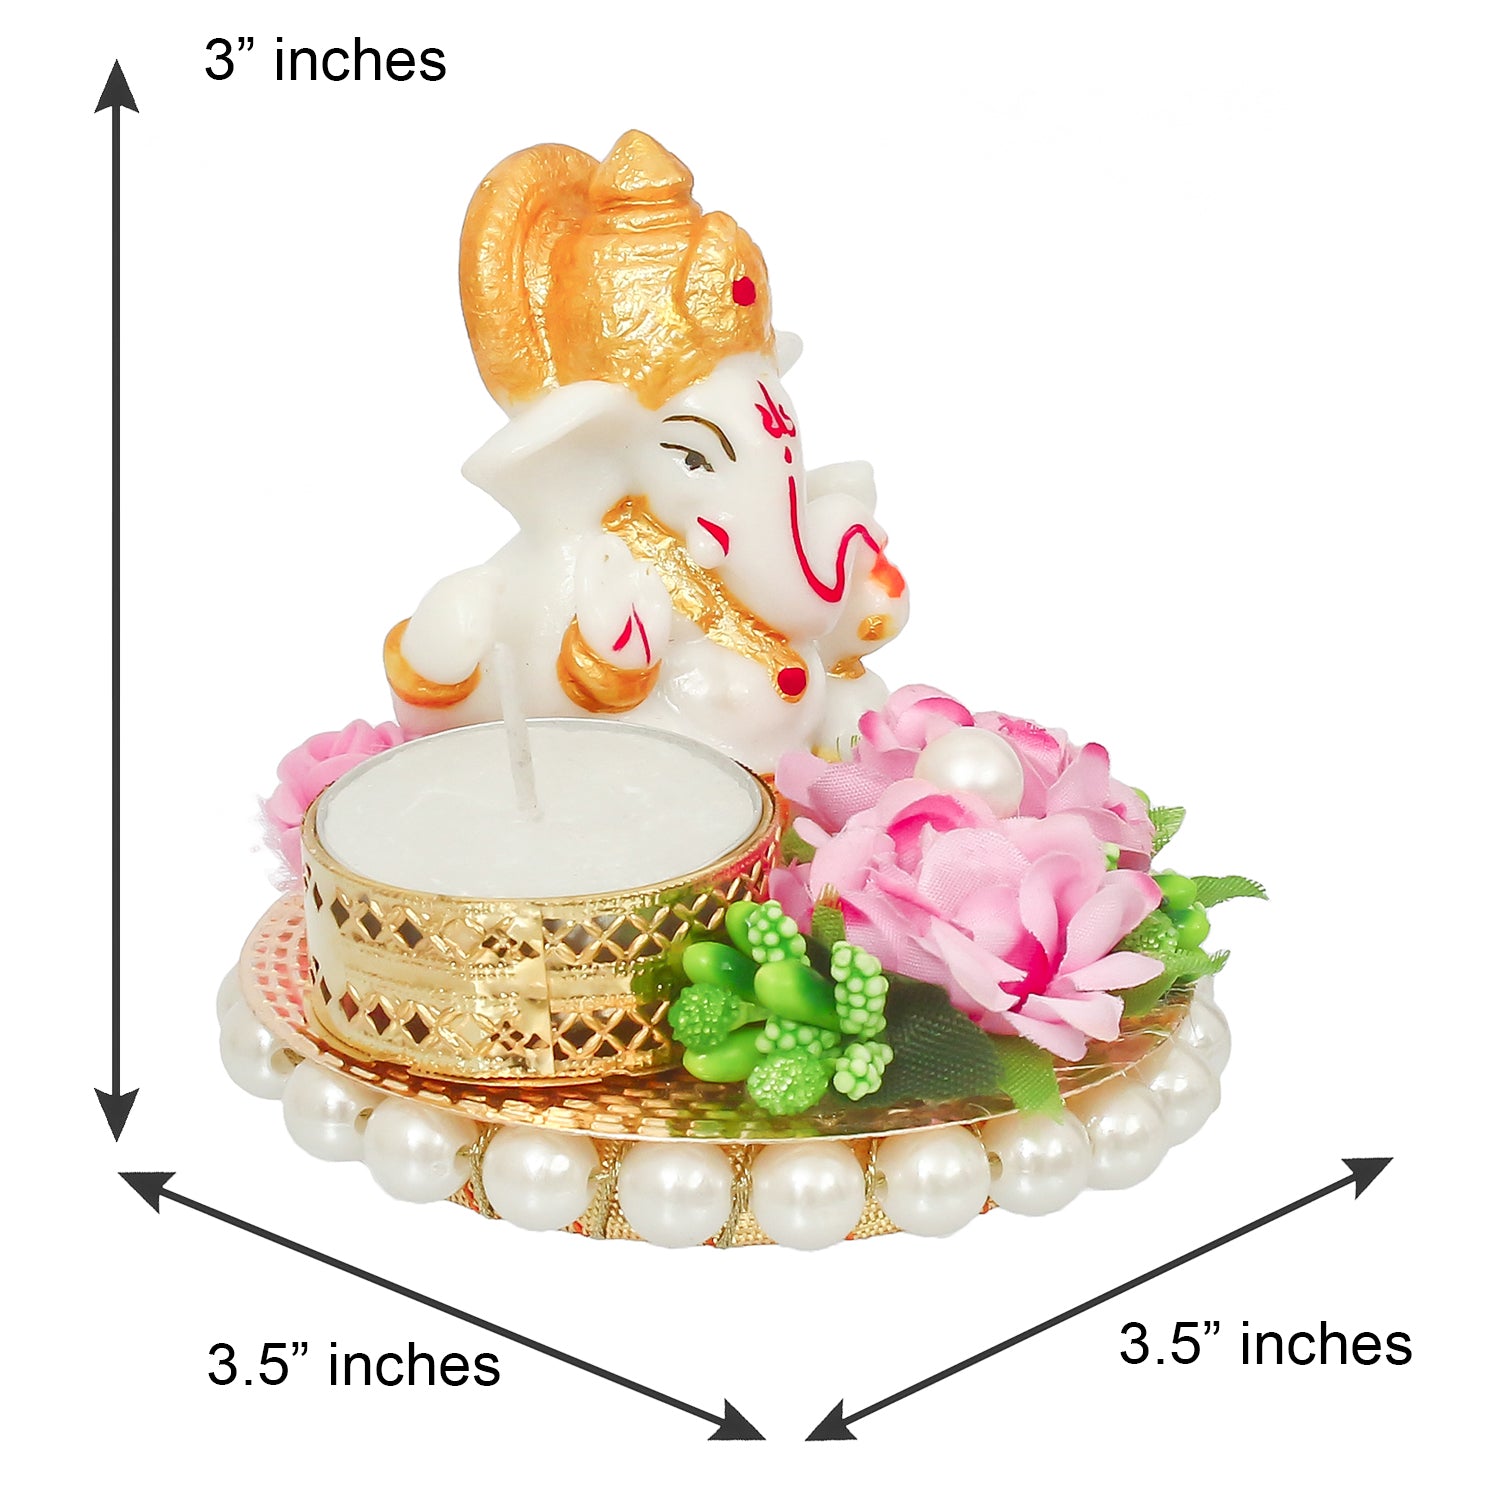 Polyresin Lord Ganesha Idol on Decorative Metal Plate with Tea Light Holder (Pink, Green and White) 4